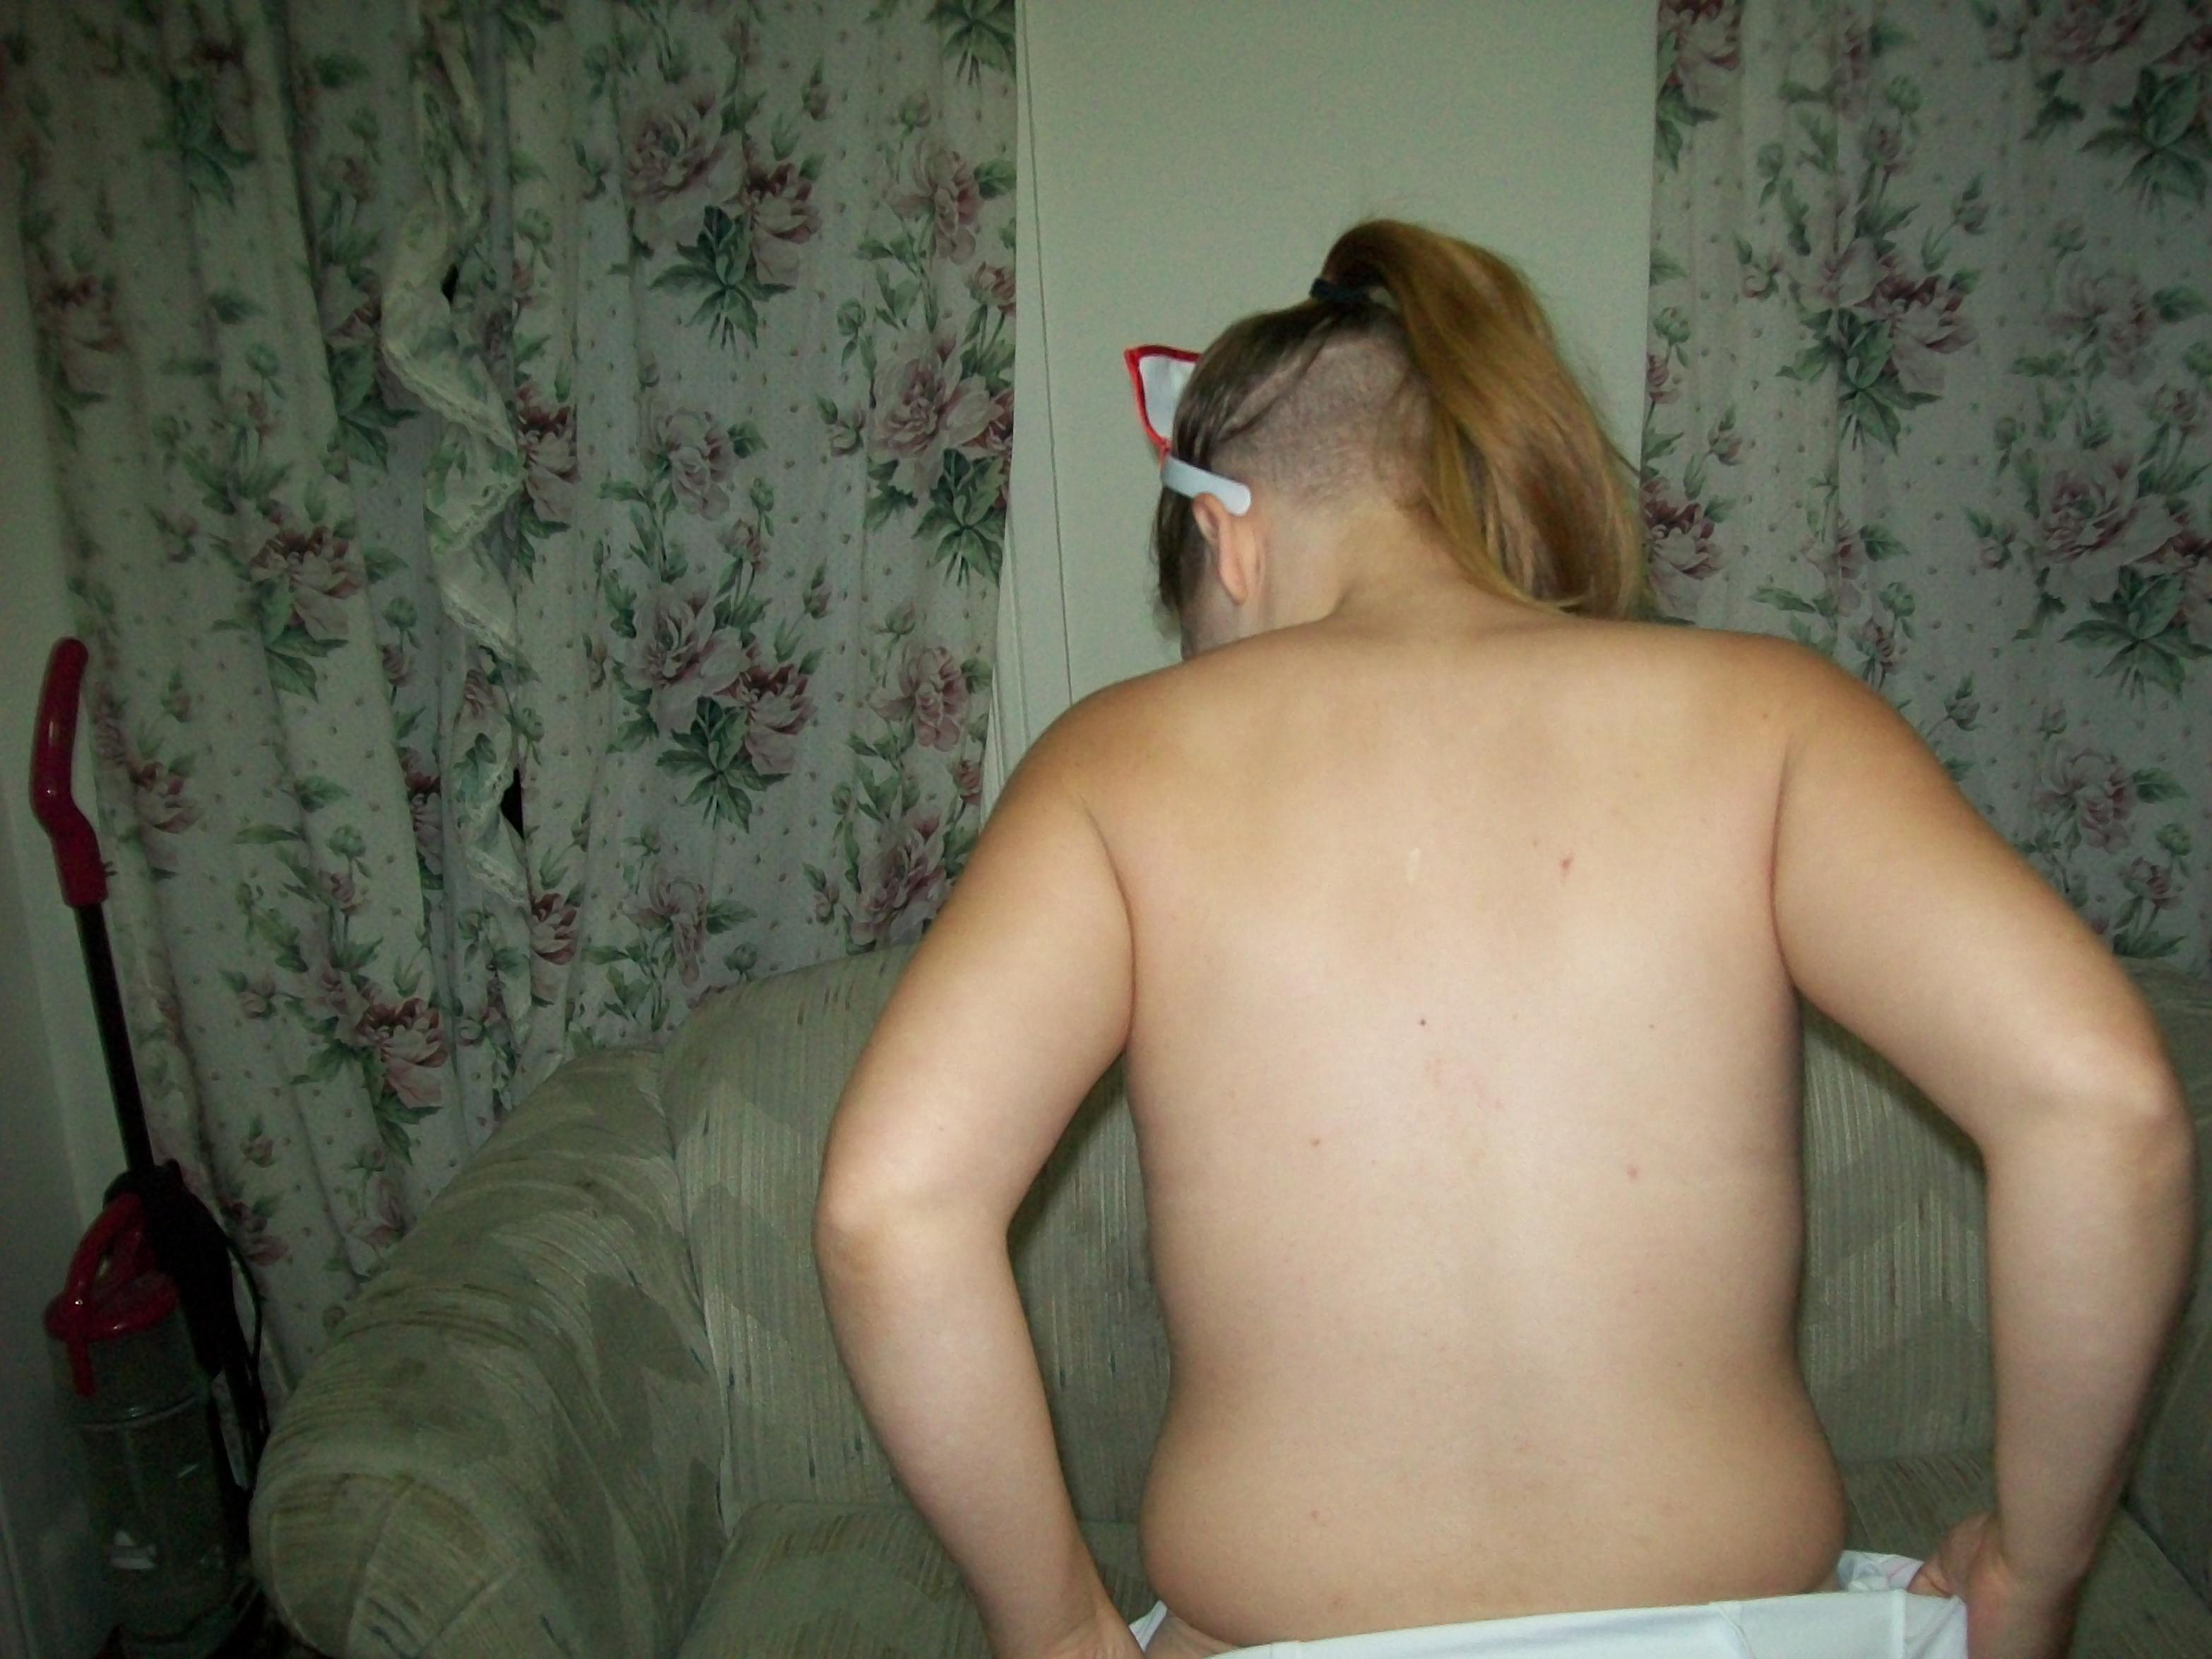 Babes with Undercut/BuzzcutSide Cut Bald and Partially Shaved Headside shave pixie bob hair fetish Page 5 Freeones Forum pic picture